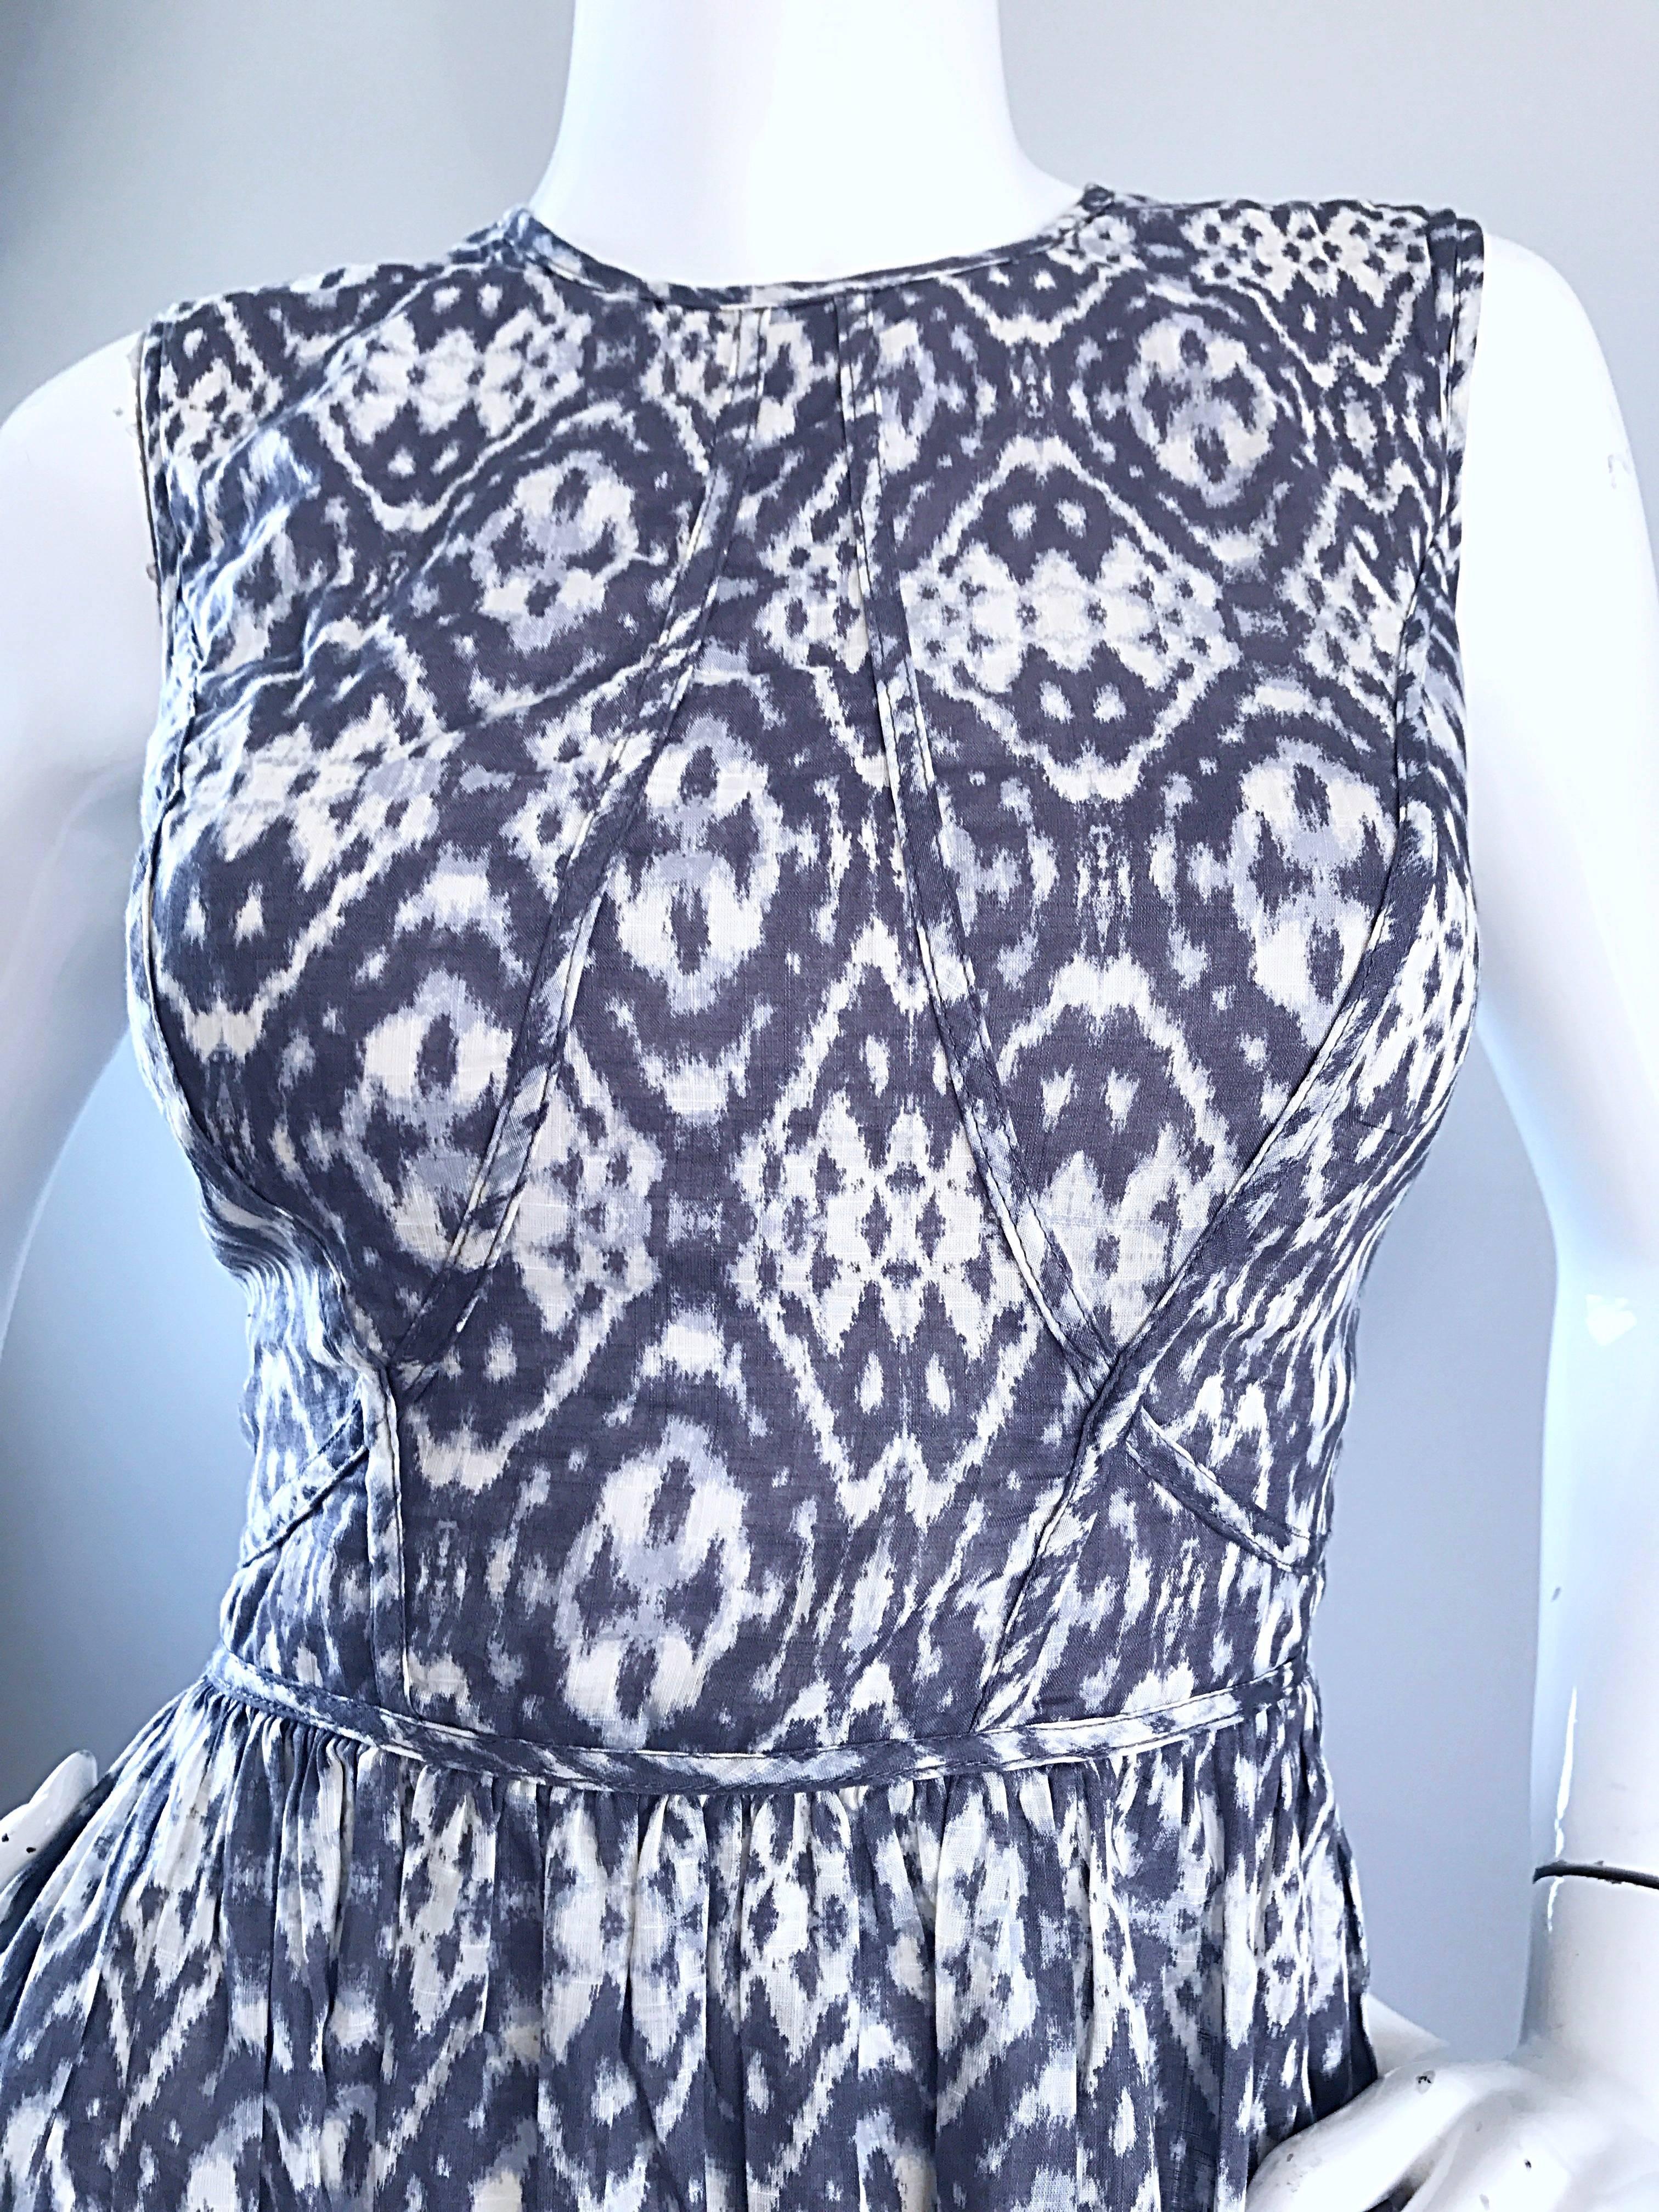 Chic brand new ZIMMERMANN lightweight cotton gray lilac lavender  and white Ikat print maxi dress! Intricate stitching detail on the bodice. High neck collar. Hidden zipper up the back with hook-and-eye closure. Can easily be dressed up or down.